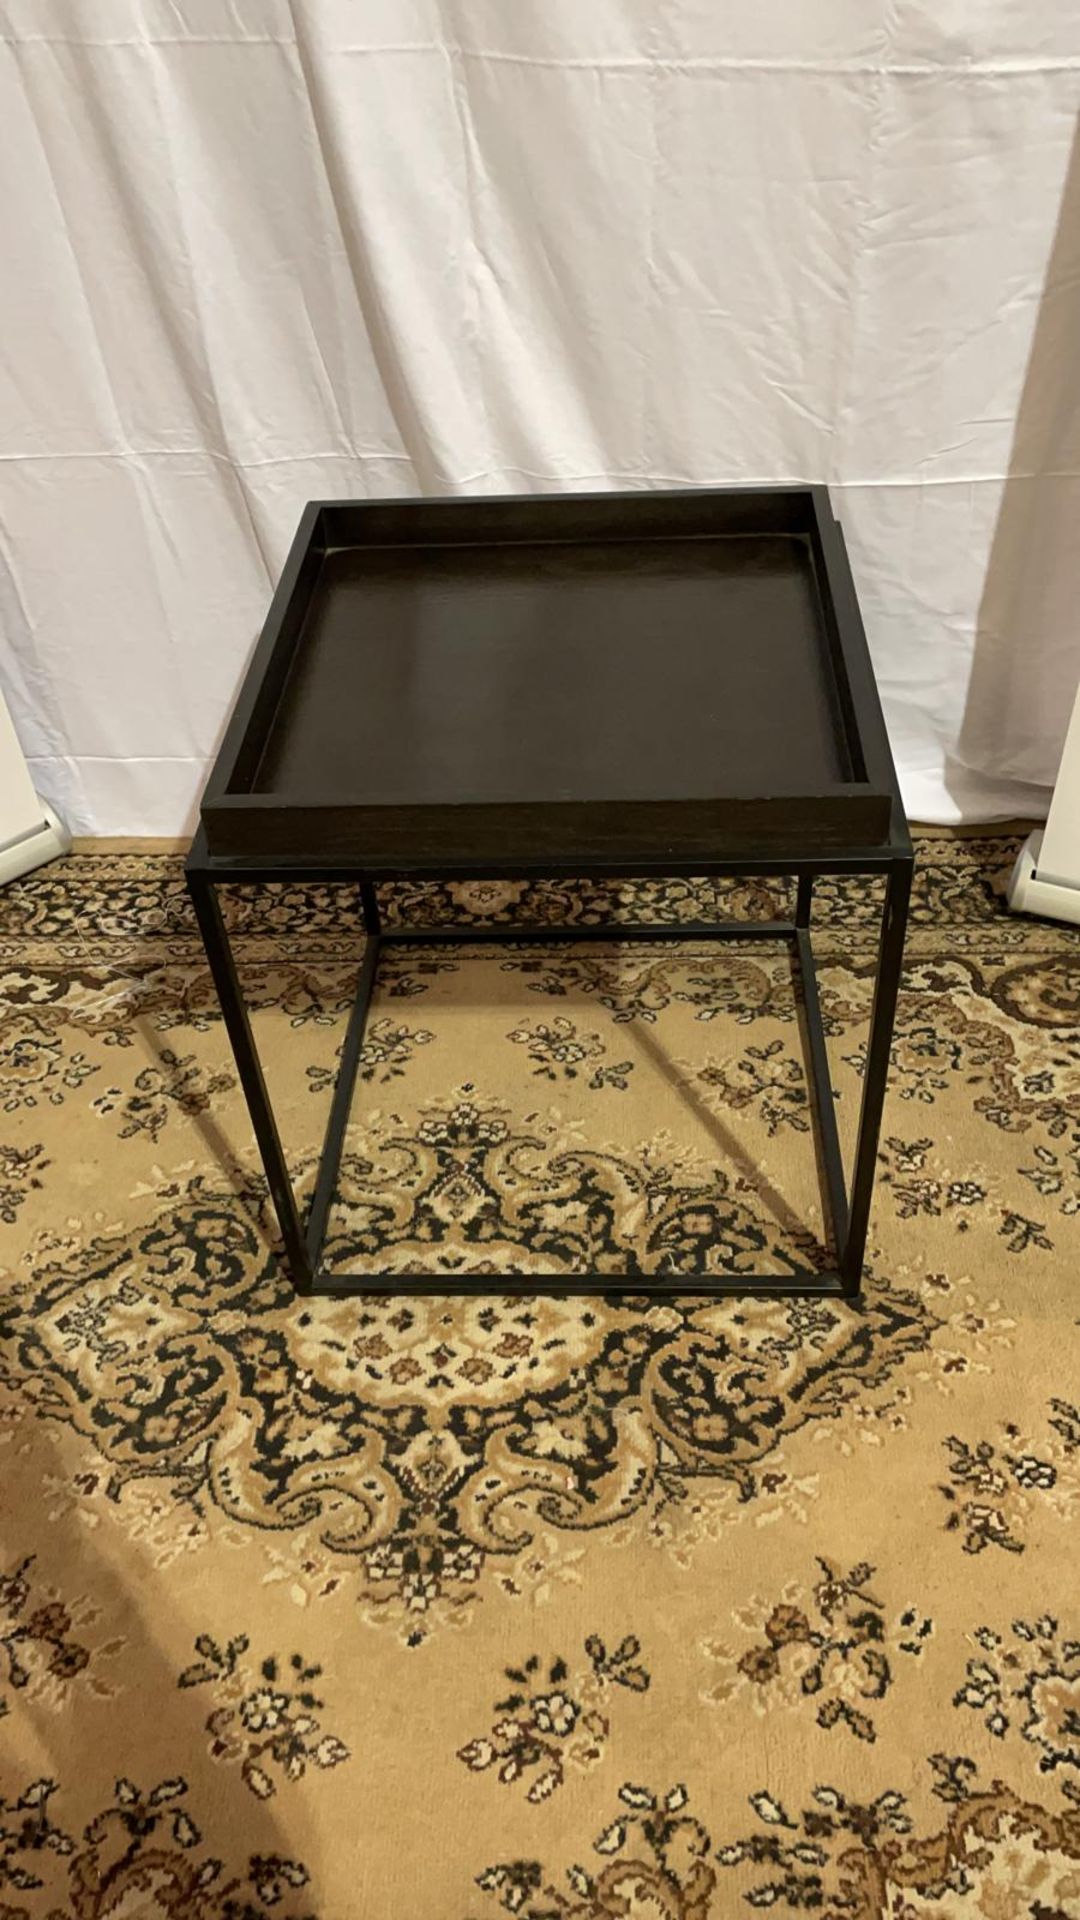 Forden Tray Side Table Black The Simple Angular Black Metal Frame Allows A Clear View Of The Floor - Bild 4 aus 4